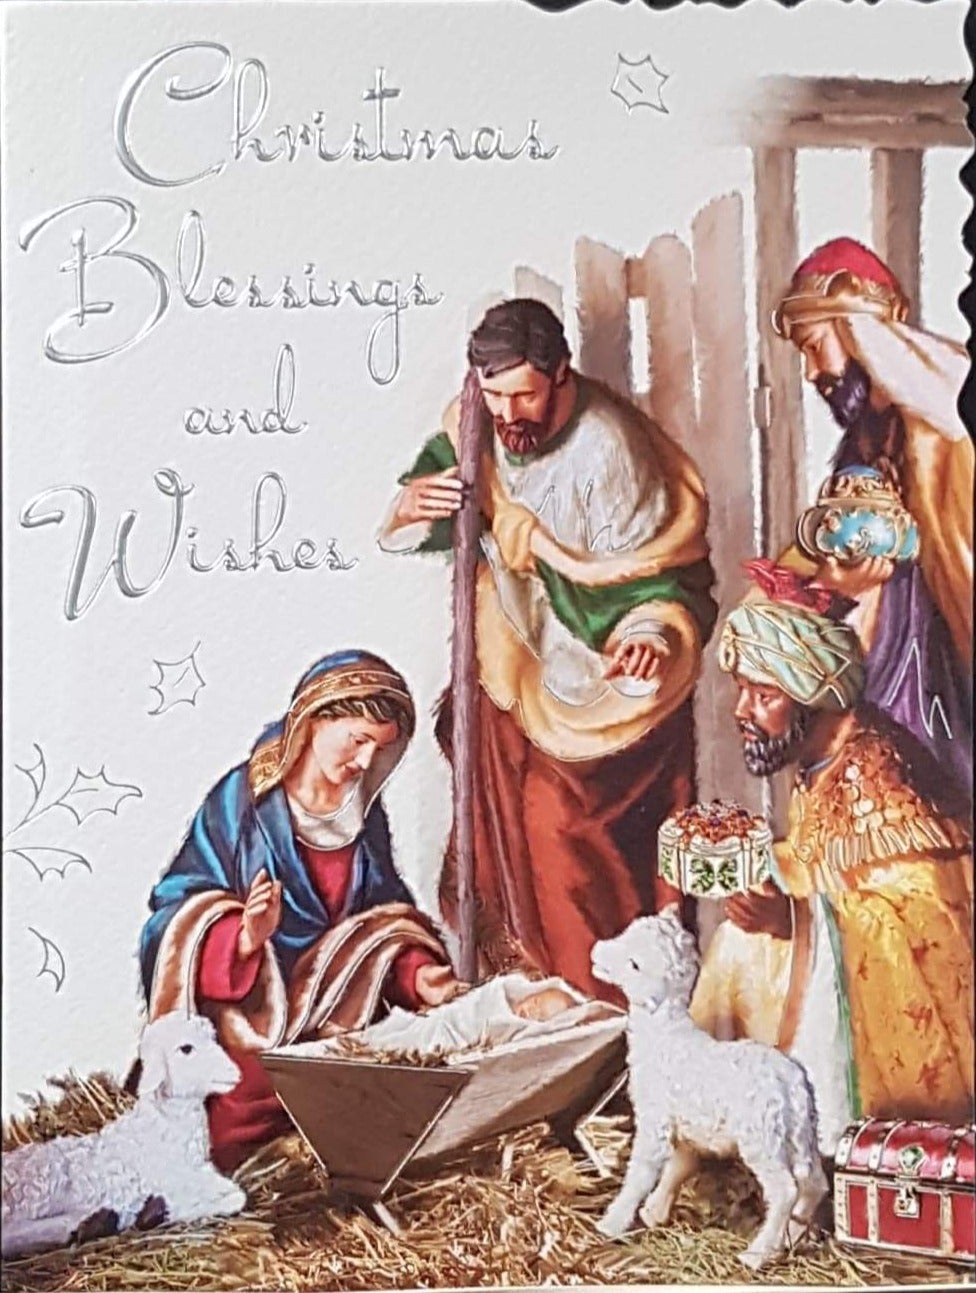 General Christmas Card - Christmas Blessings and Wishes & Baby Jesus and Company